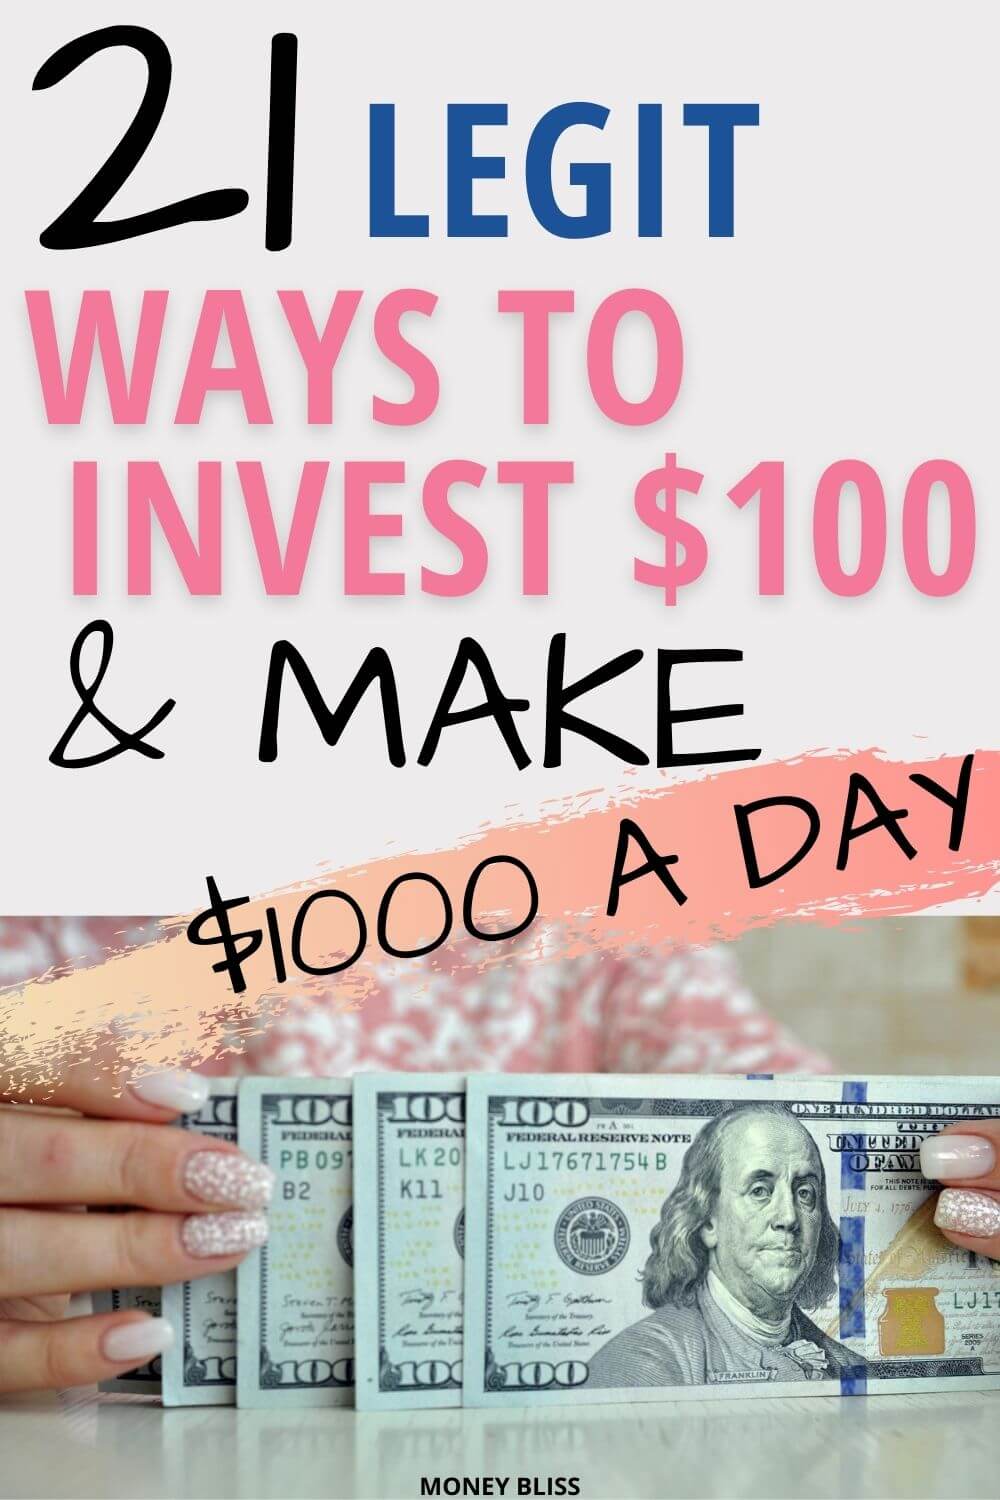 How to make $1000 from $100?